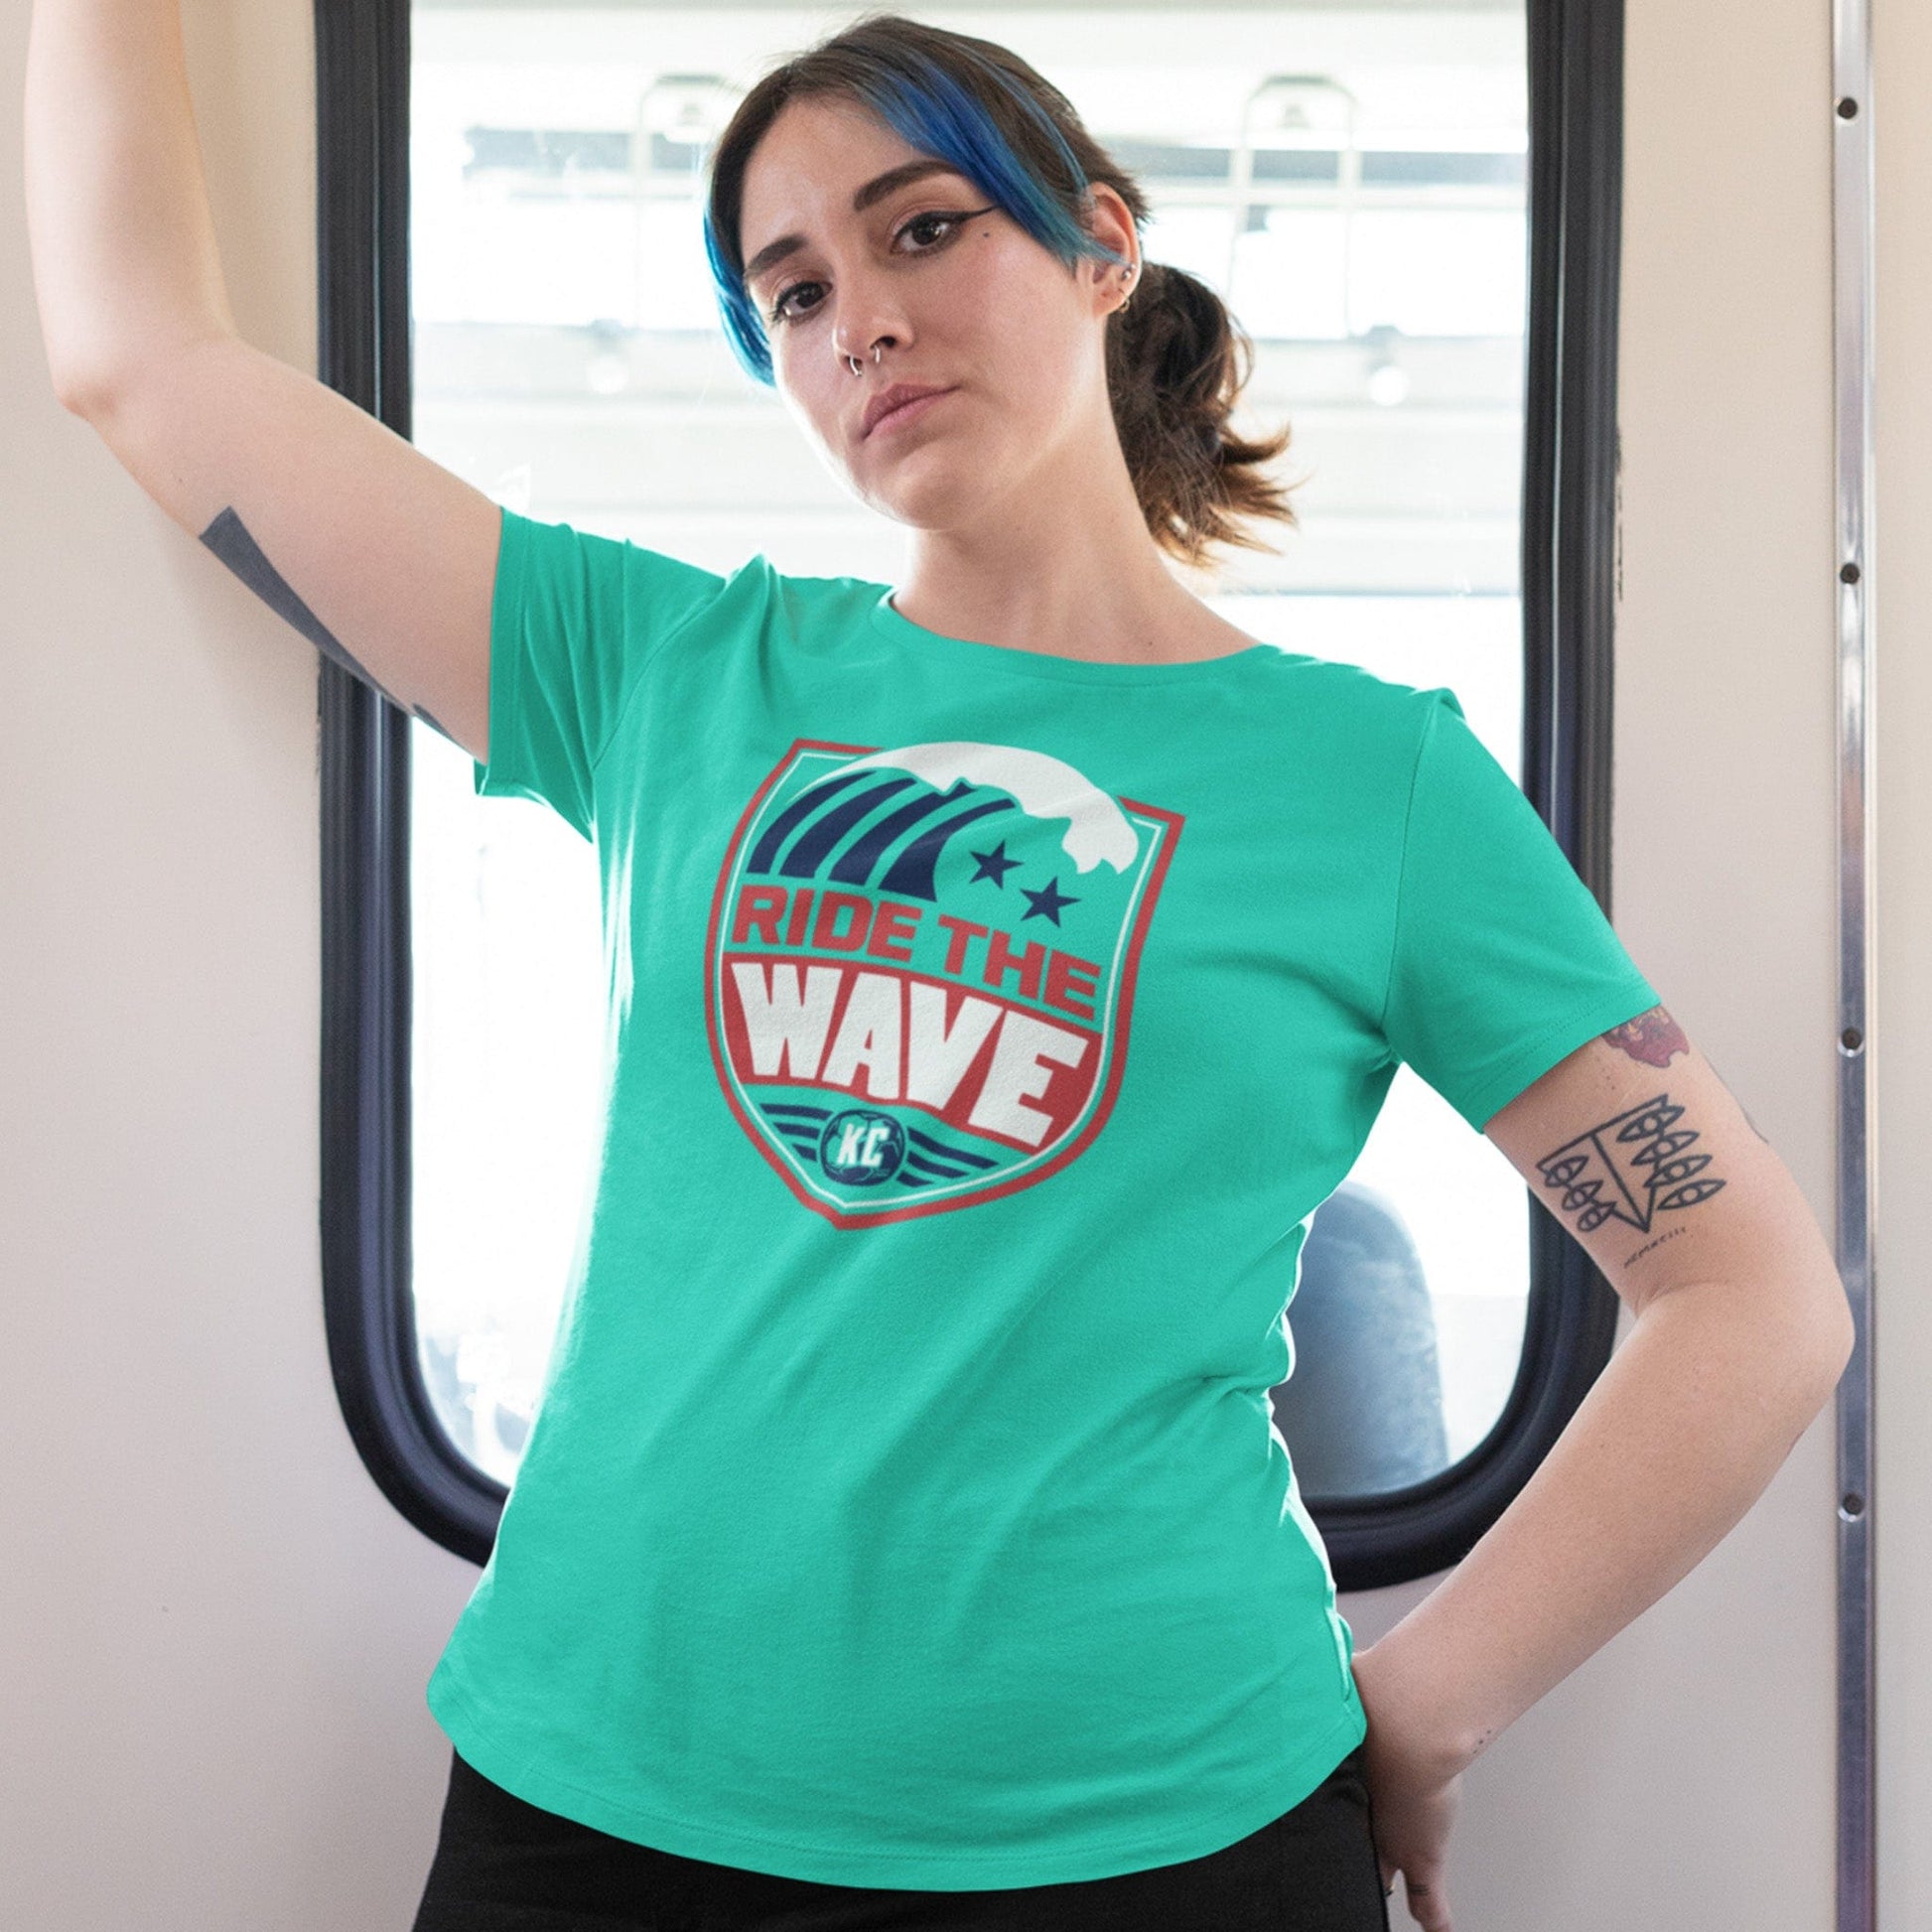 KC Swag Kansas City Current RIDE THE WAVE on teal unisex t-shirt worn by female model standing in street car